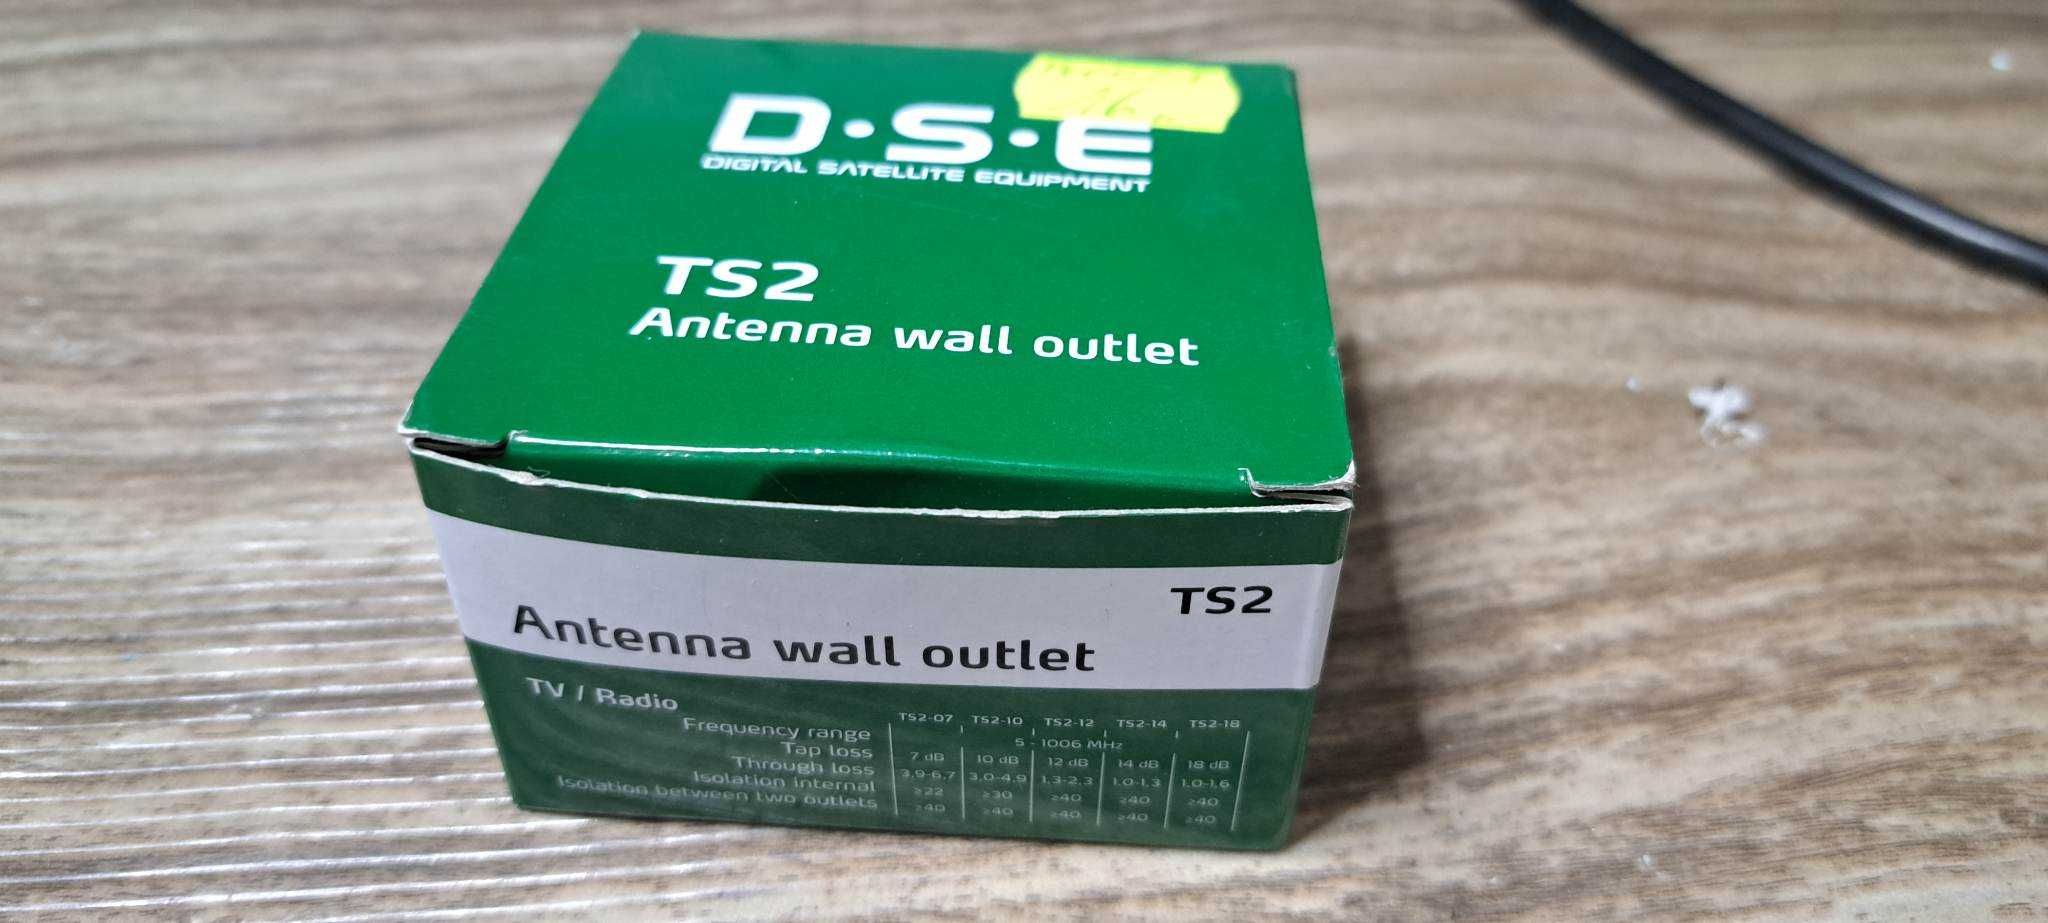 TS2 Antenna wall outlet DSE